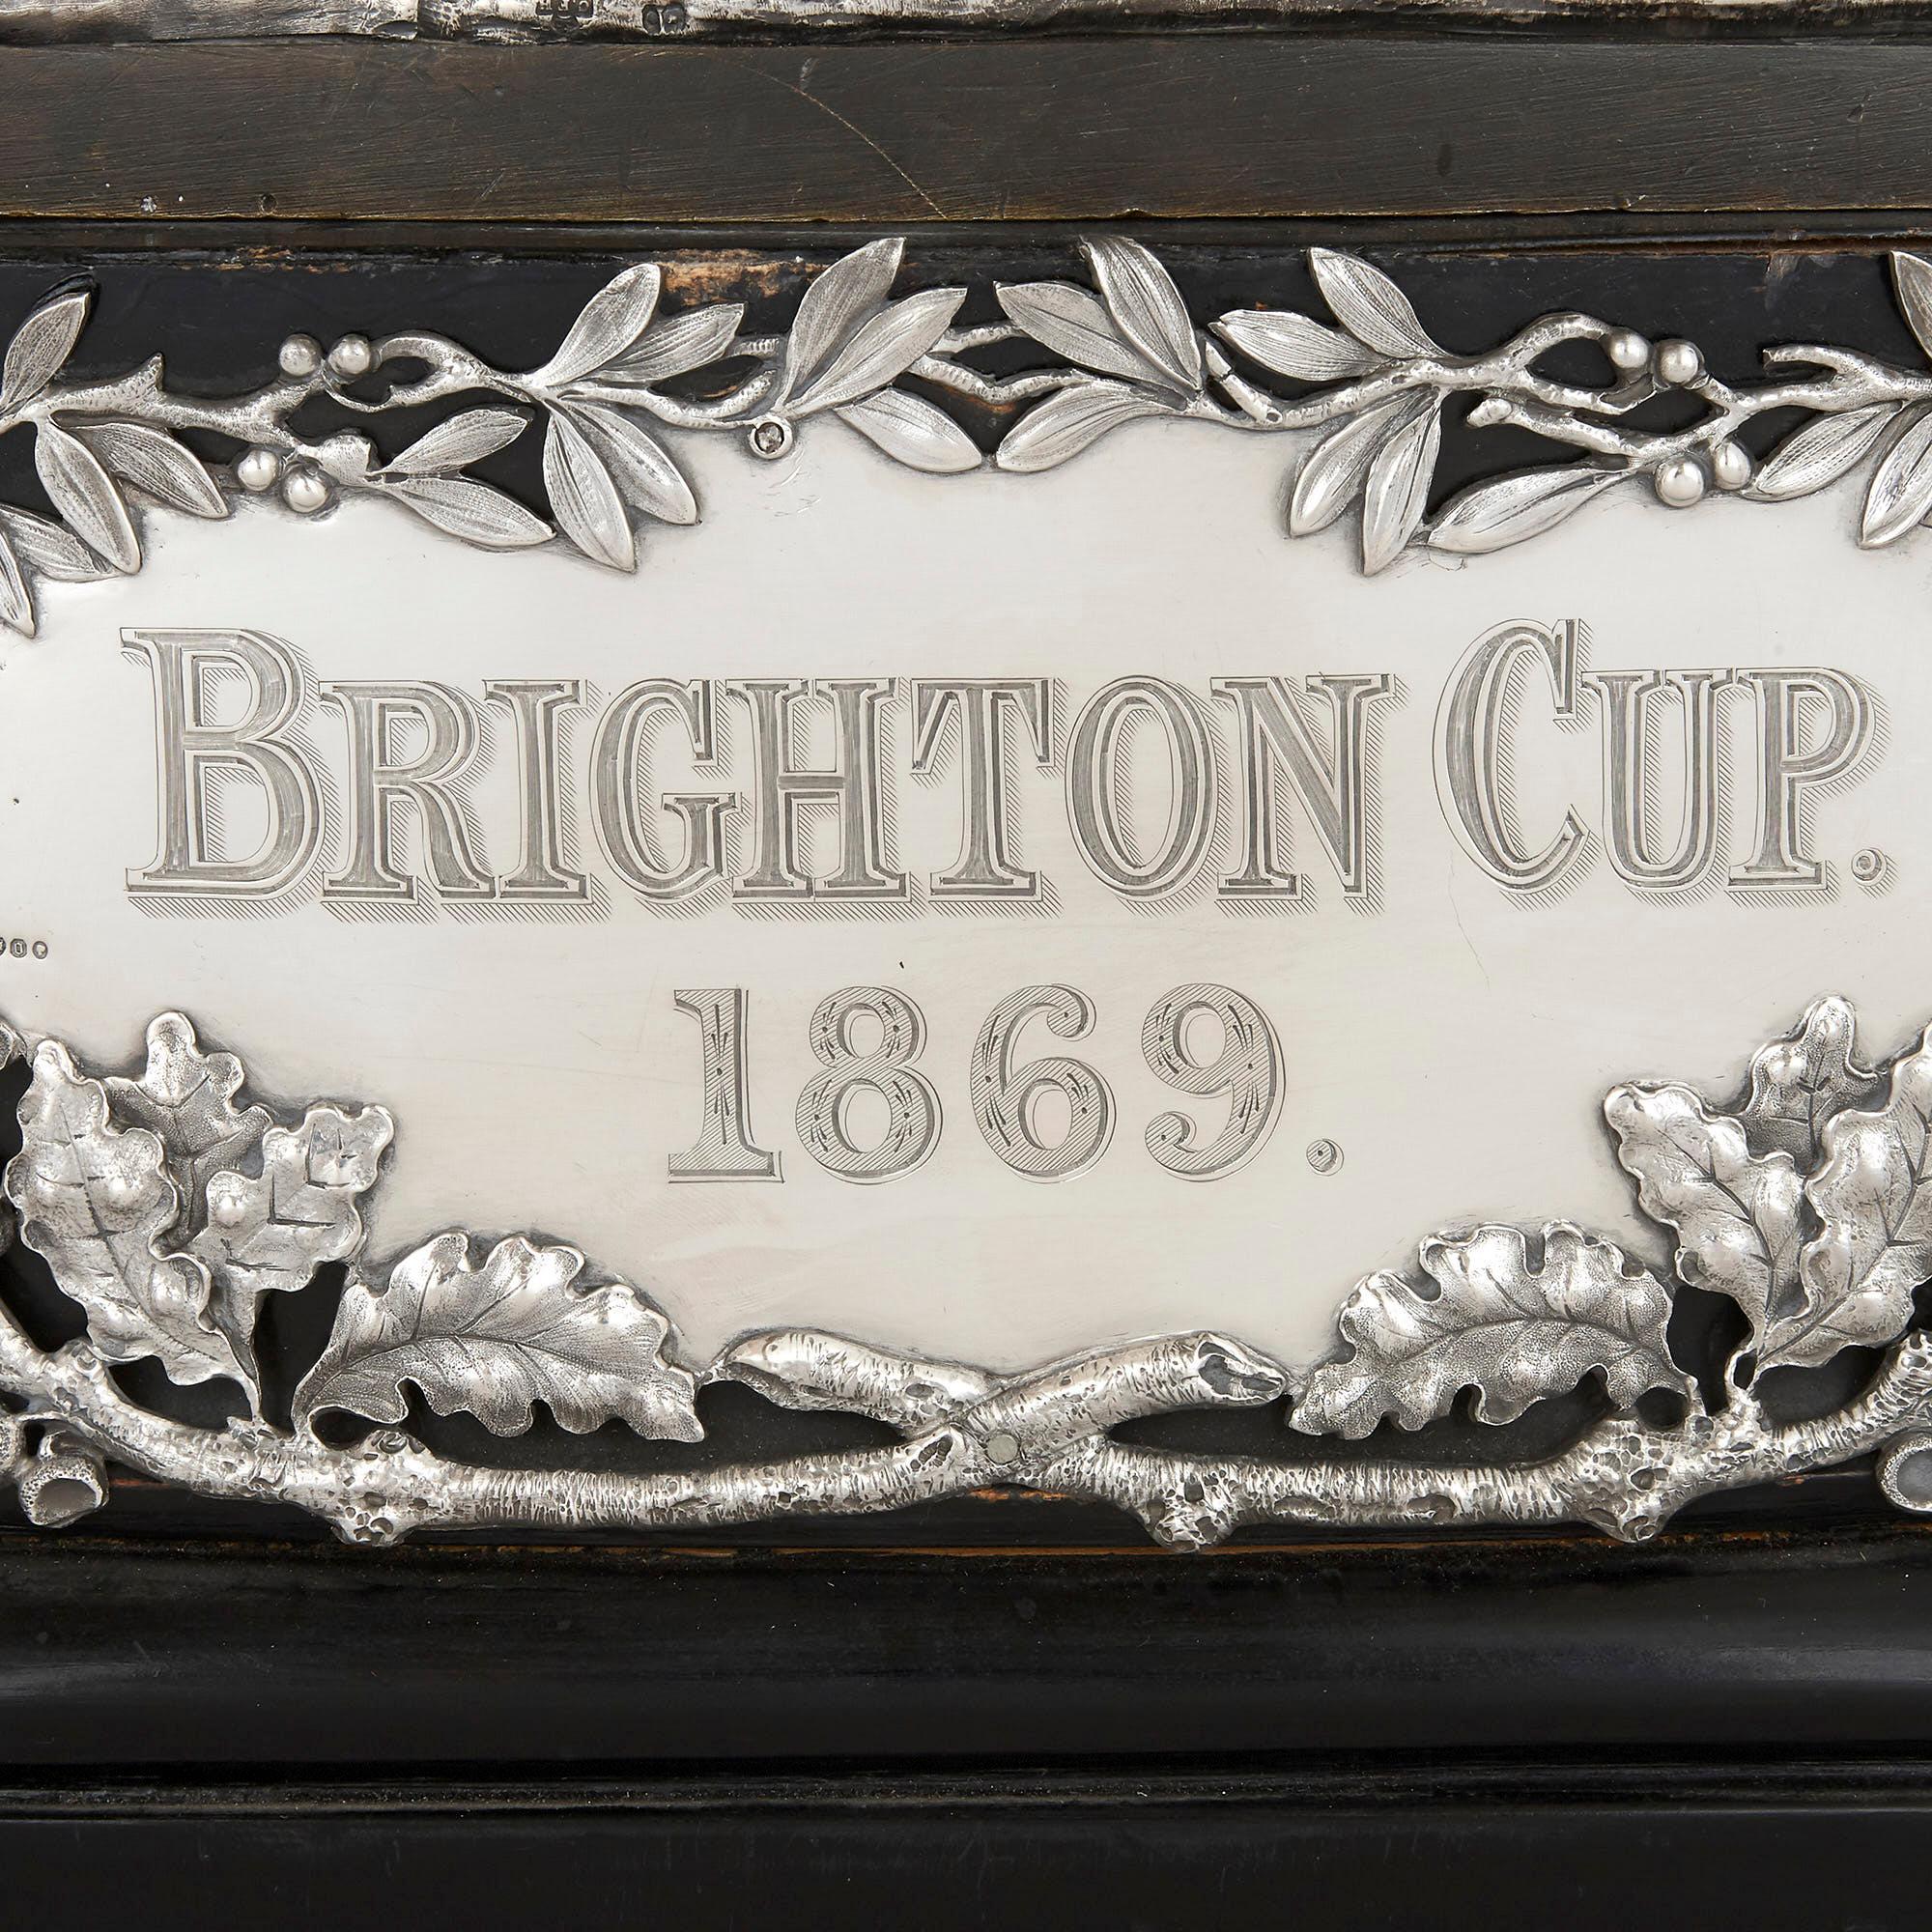 19th Century Brighton Cup, Very Large Silver and Bronze Horse Racing Trophy by Monti